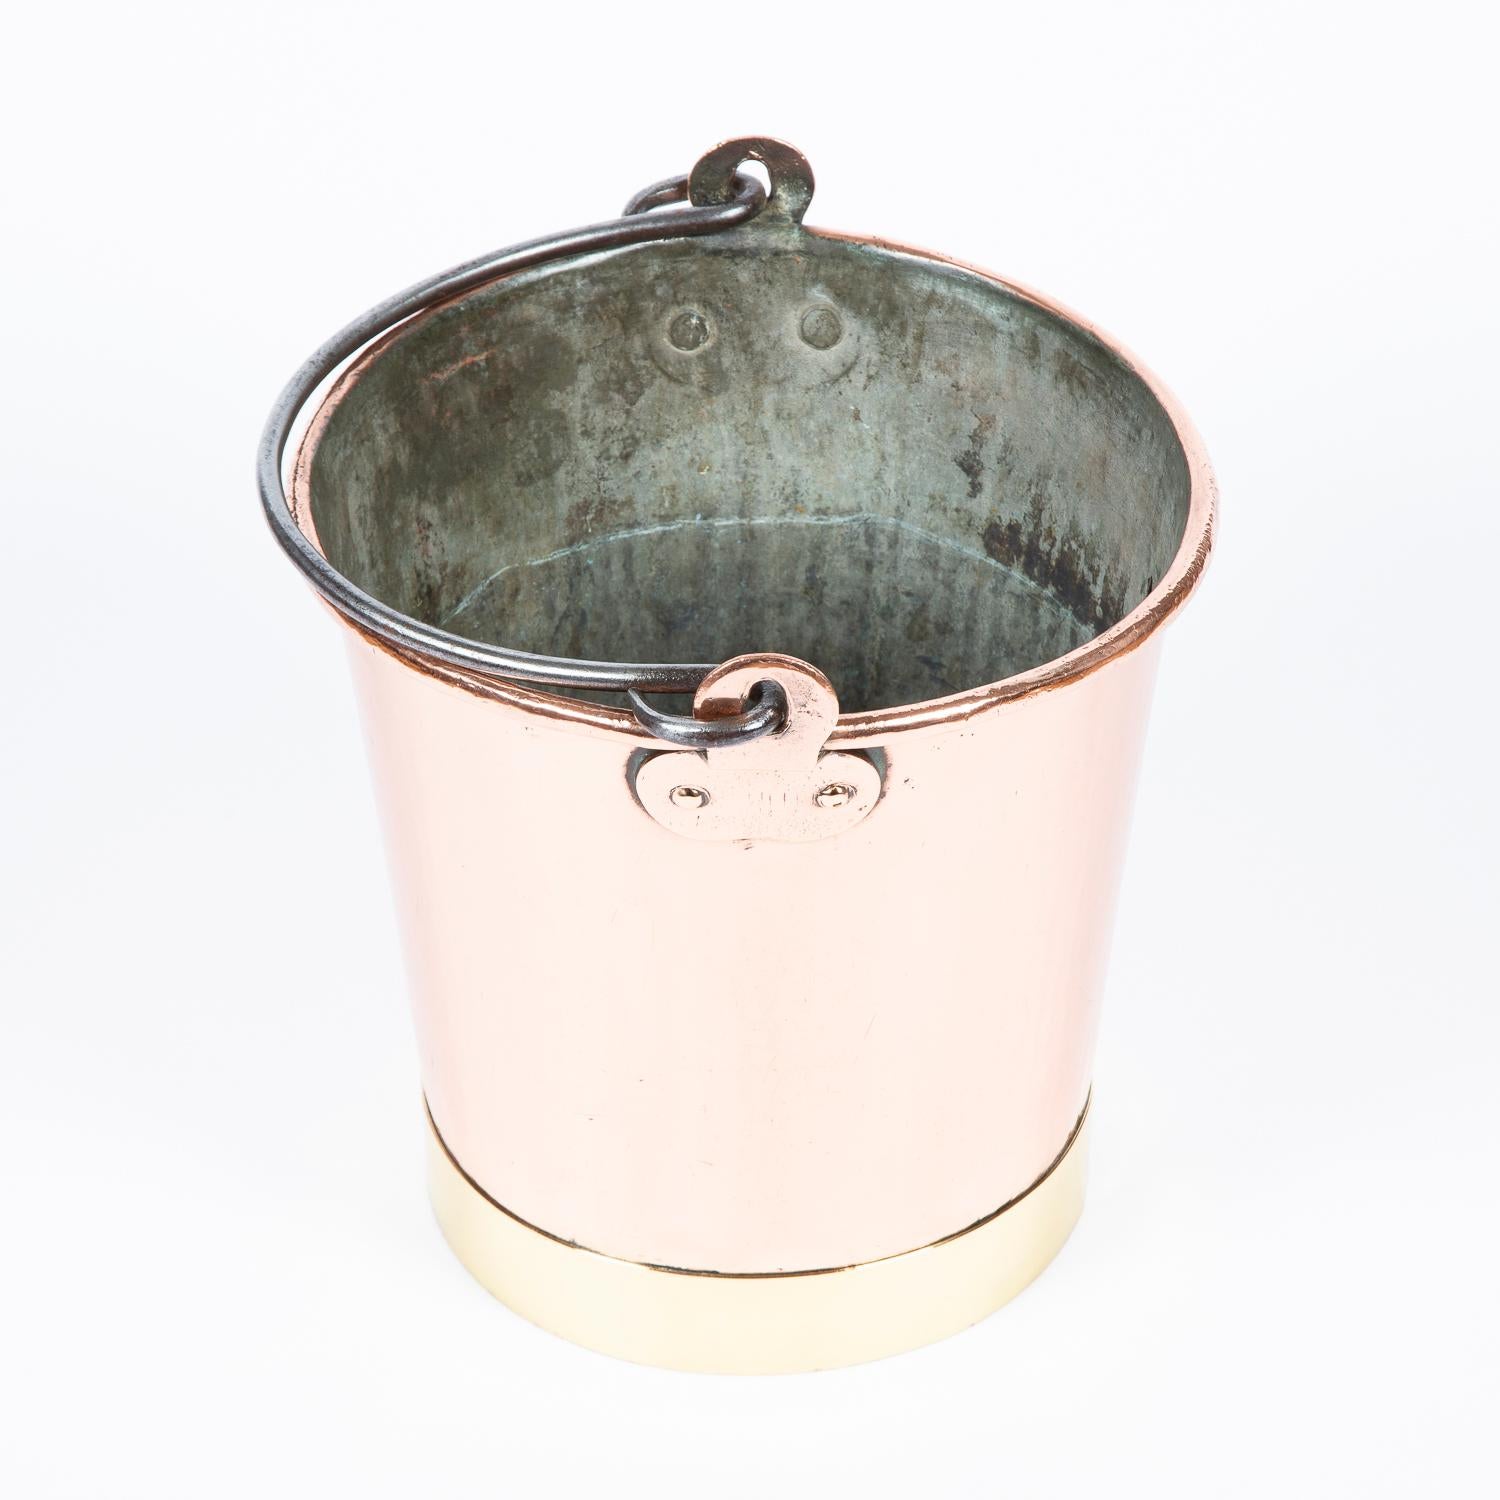 Copper fire bucket with brass base and iron handle.

Suitable size to be used as a planter or wine cooler.